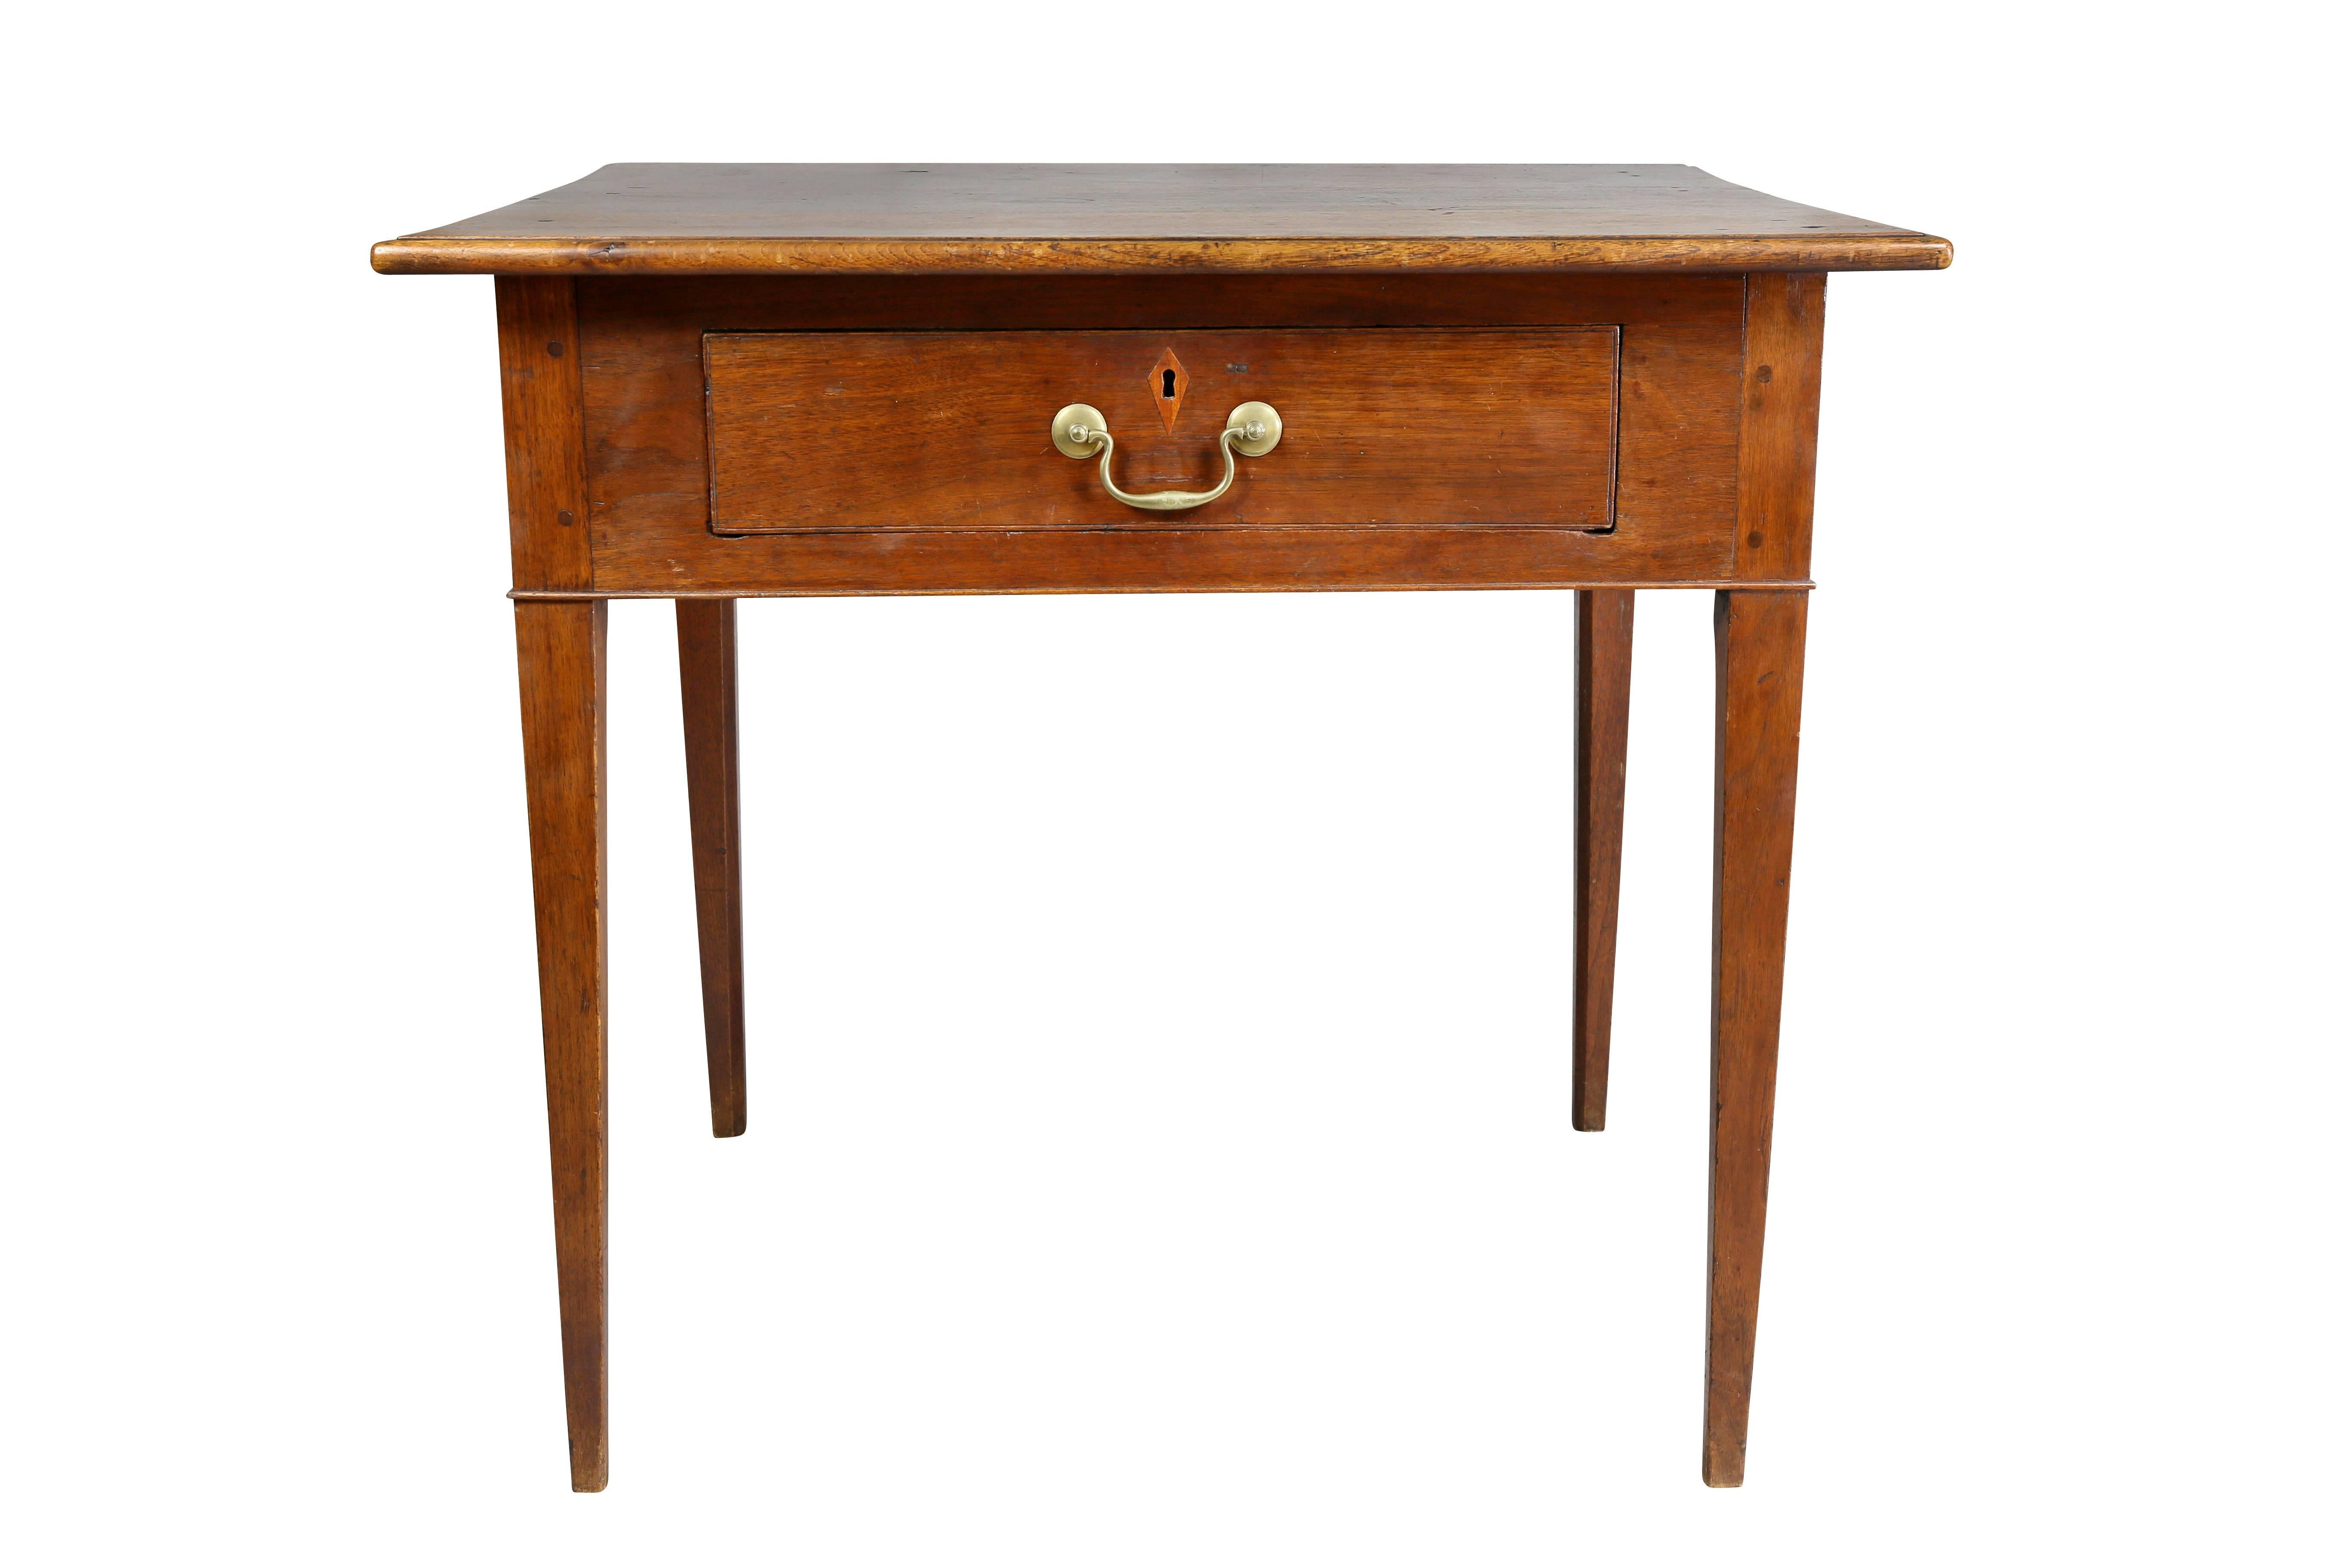 Rectangular top over a single drawer with inlaid escutcheon and original bail handle raised on square tapered legs.